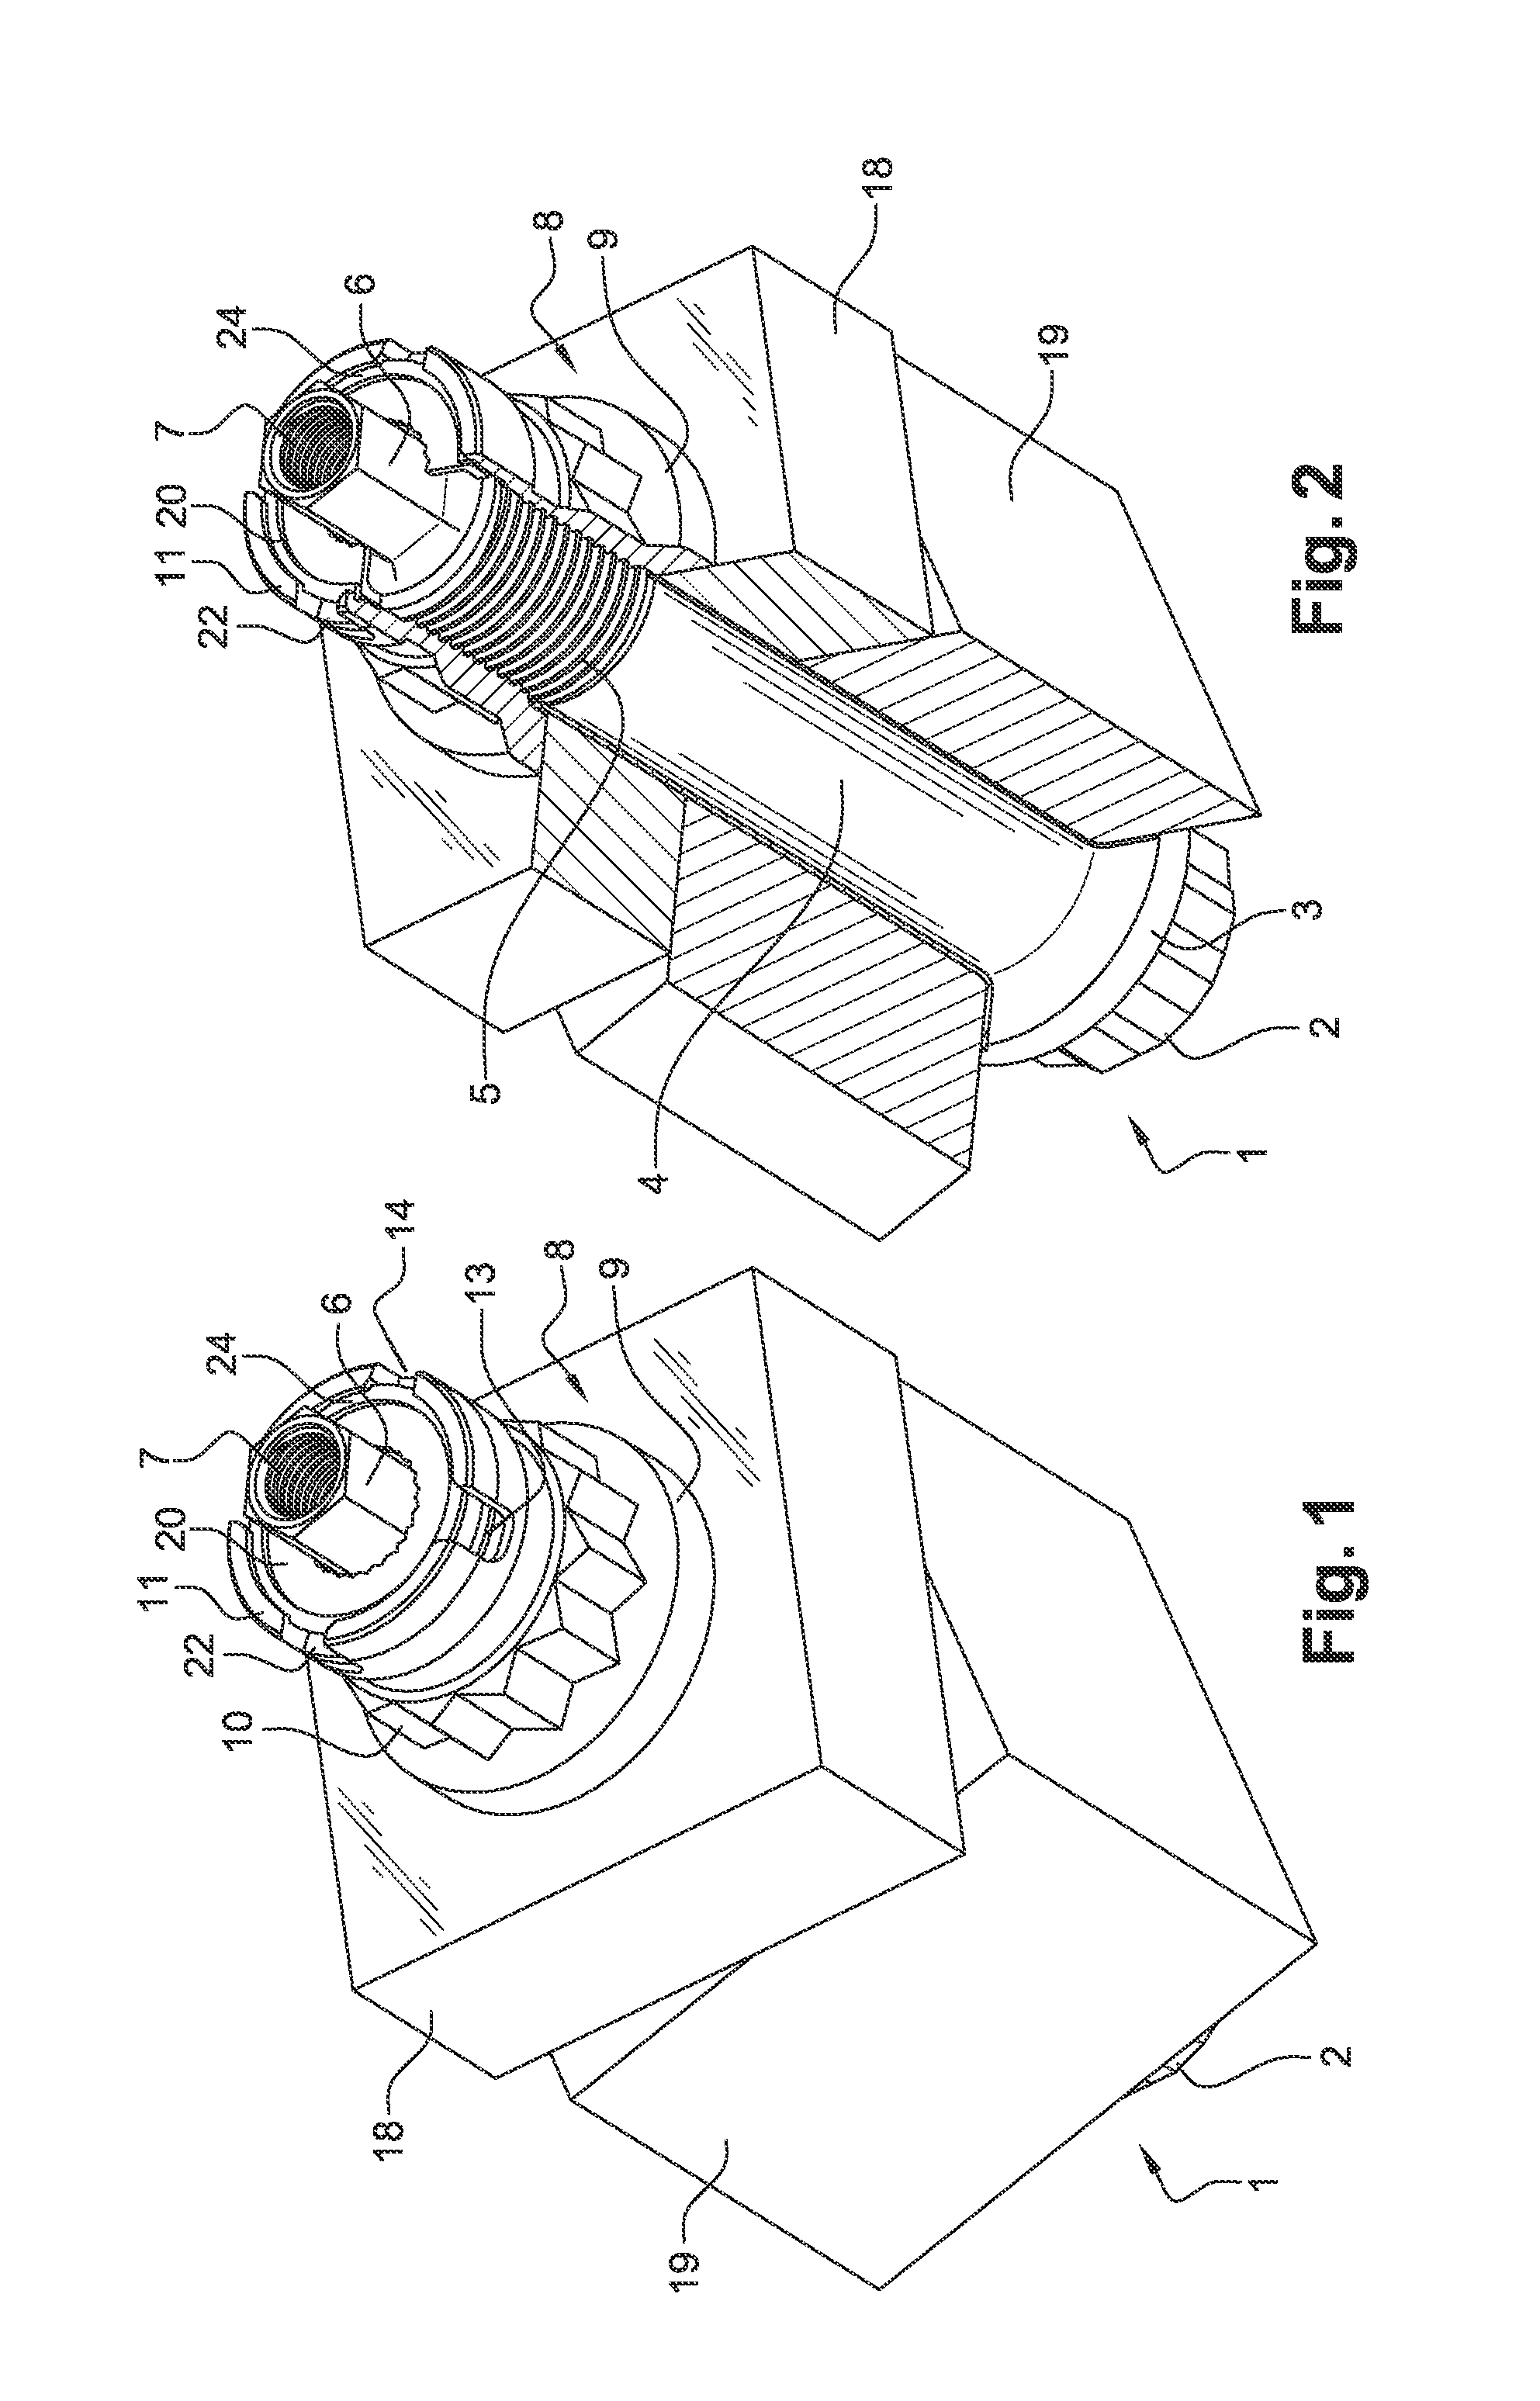 Device for fastening